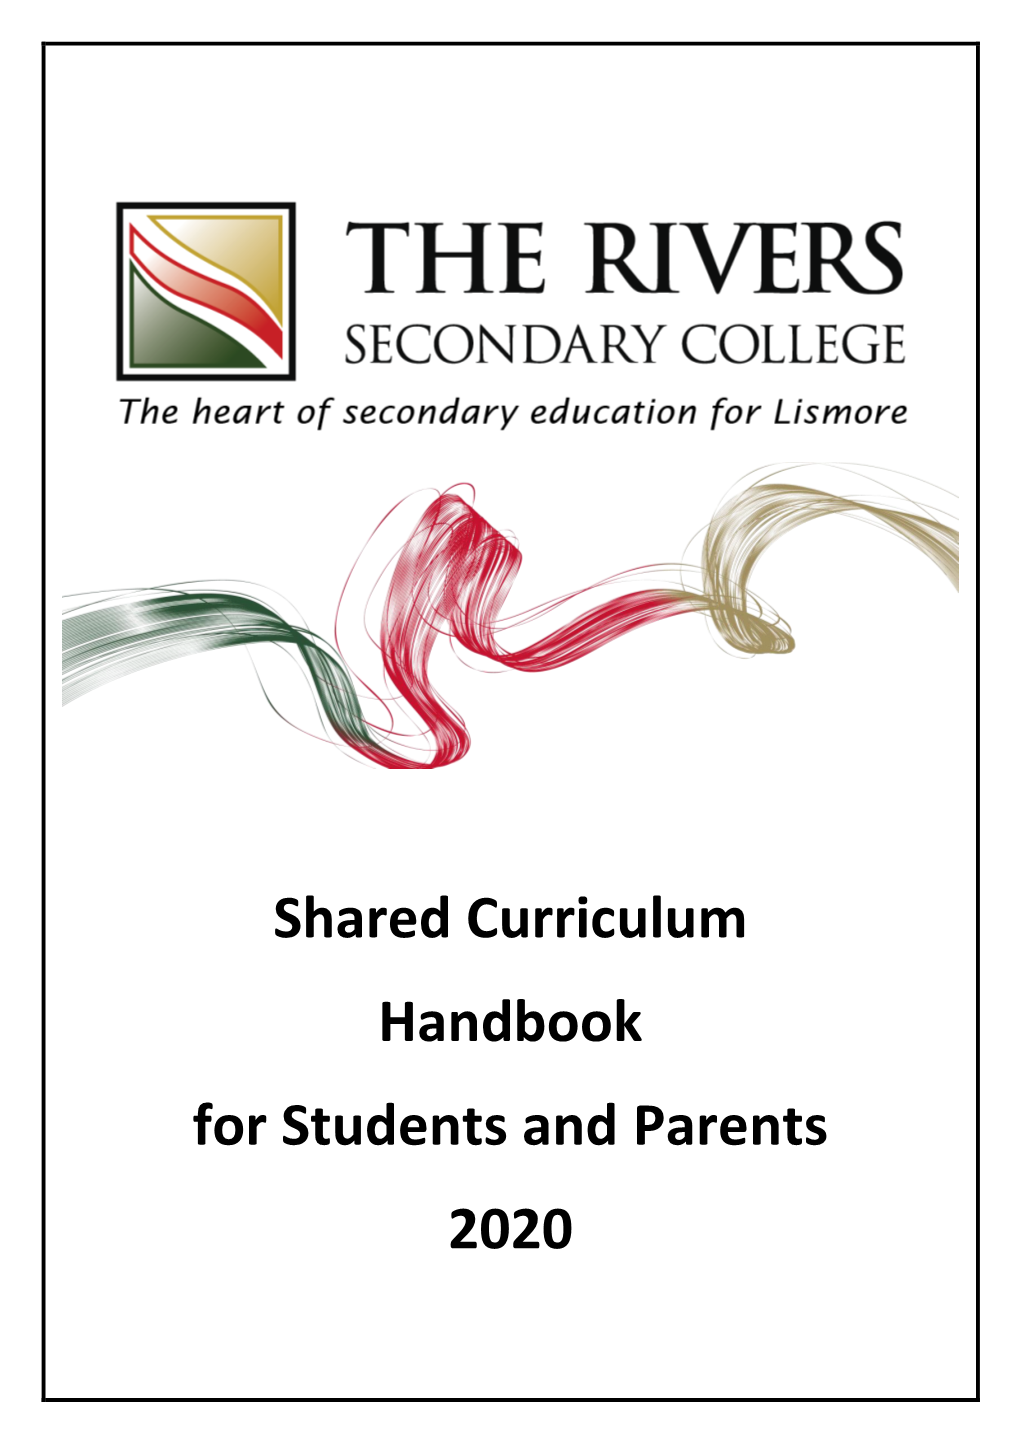 Shared Curriculum Handbook for Students and Parents 2020